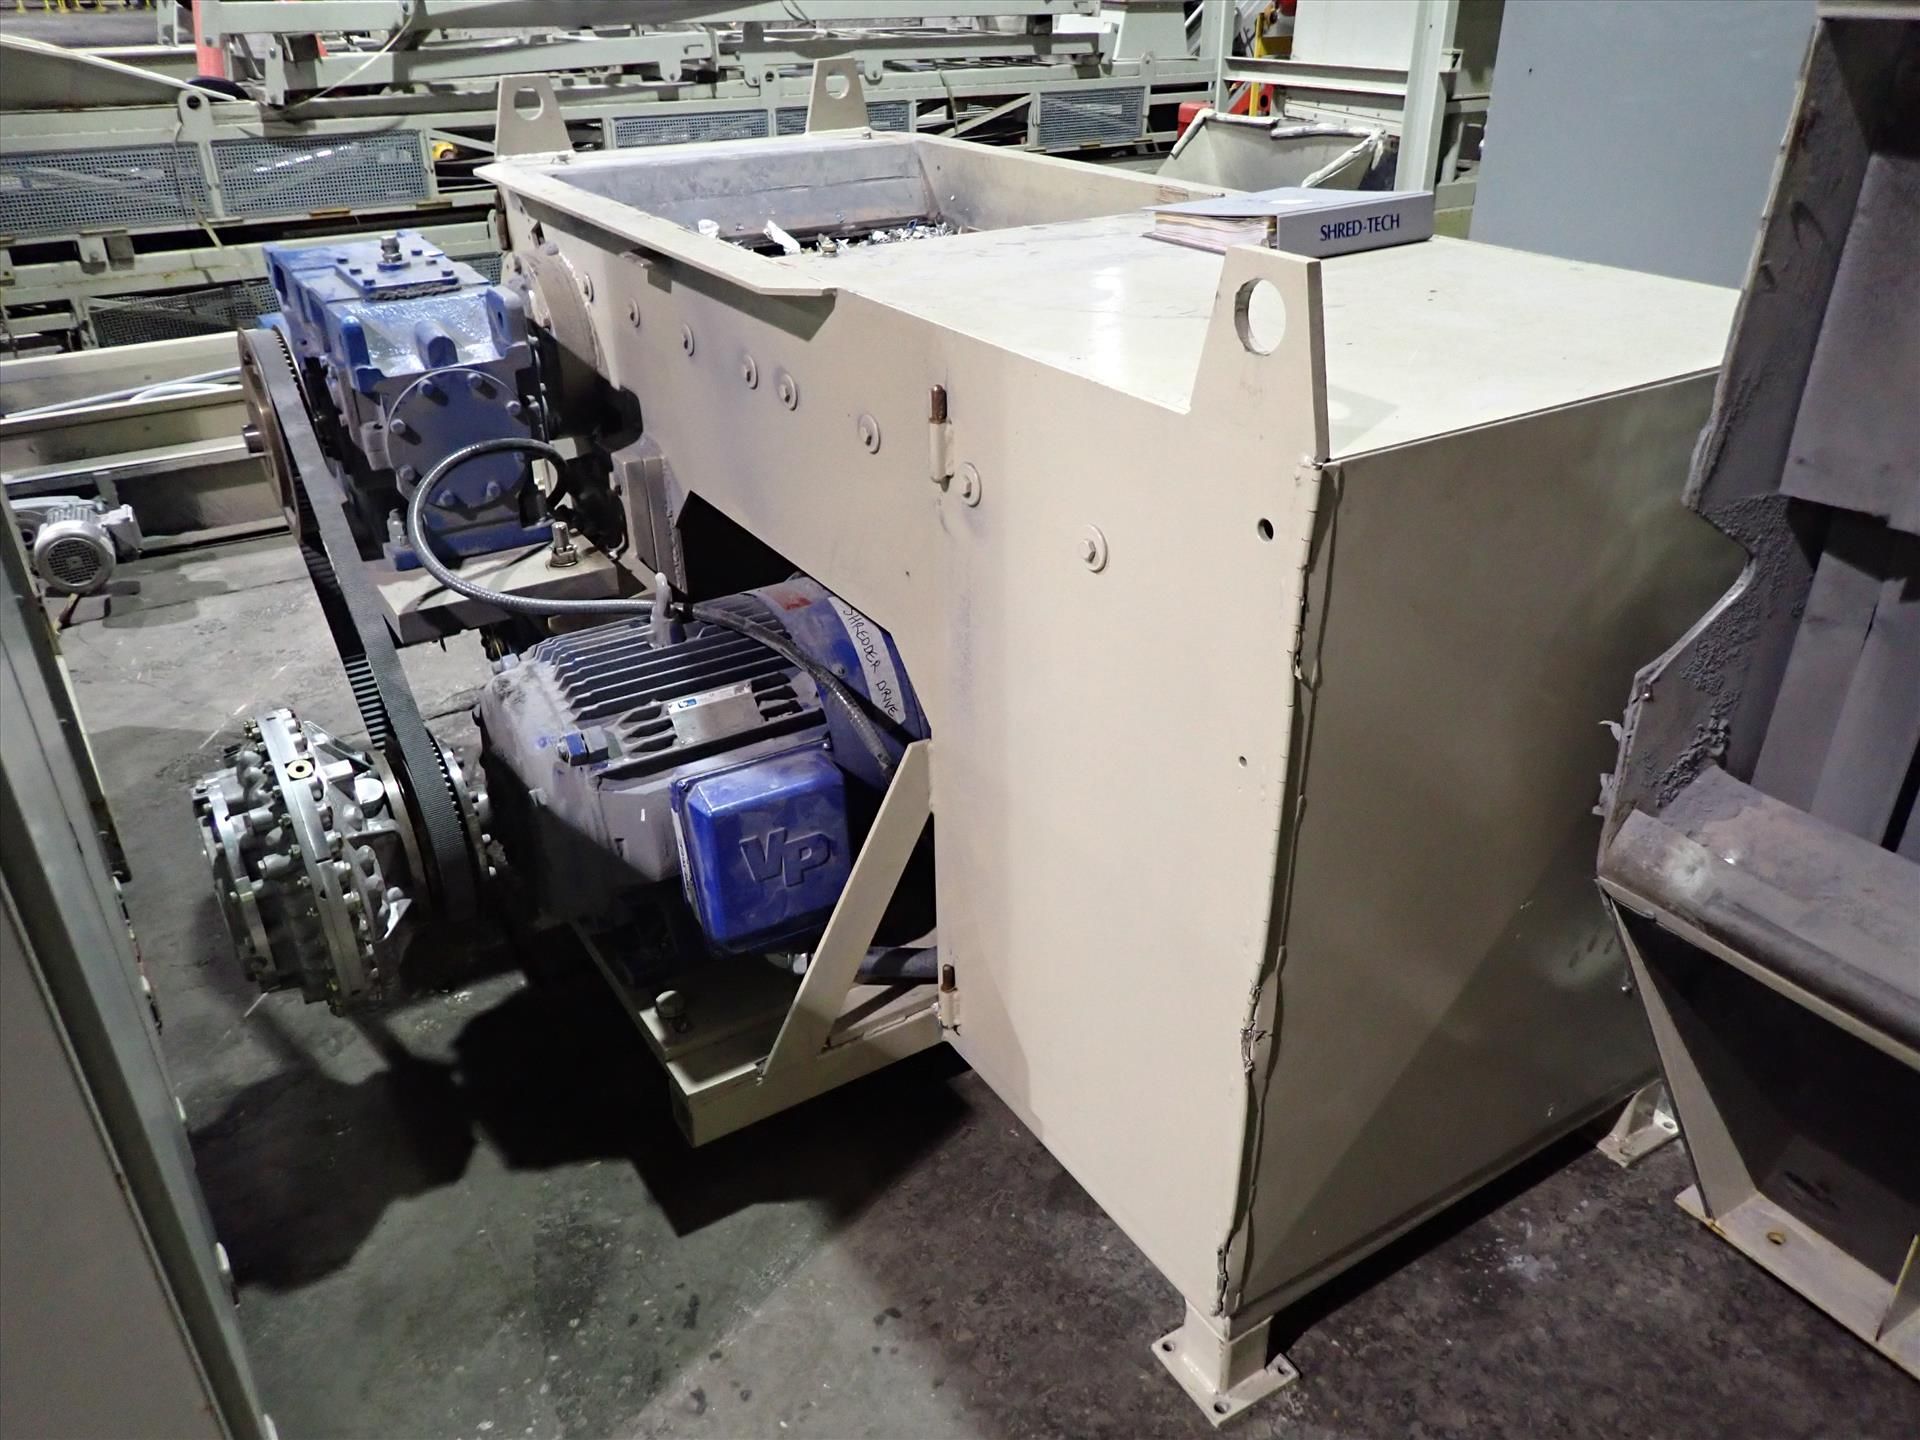 Shred-Tech shredder, mod. STS-45, ser. no. STS-45-A868-03-04 c/w feed hopper, waste auger, approx. - Image 2 of 5